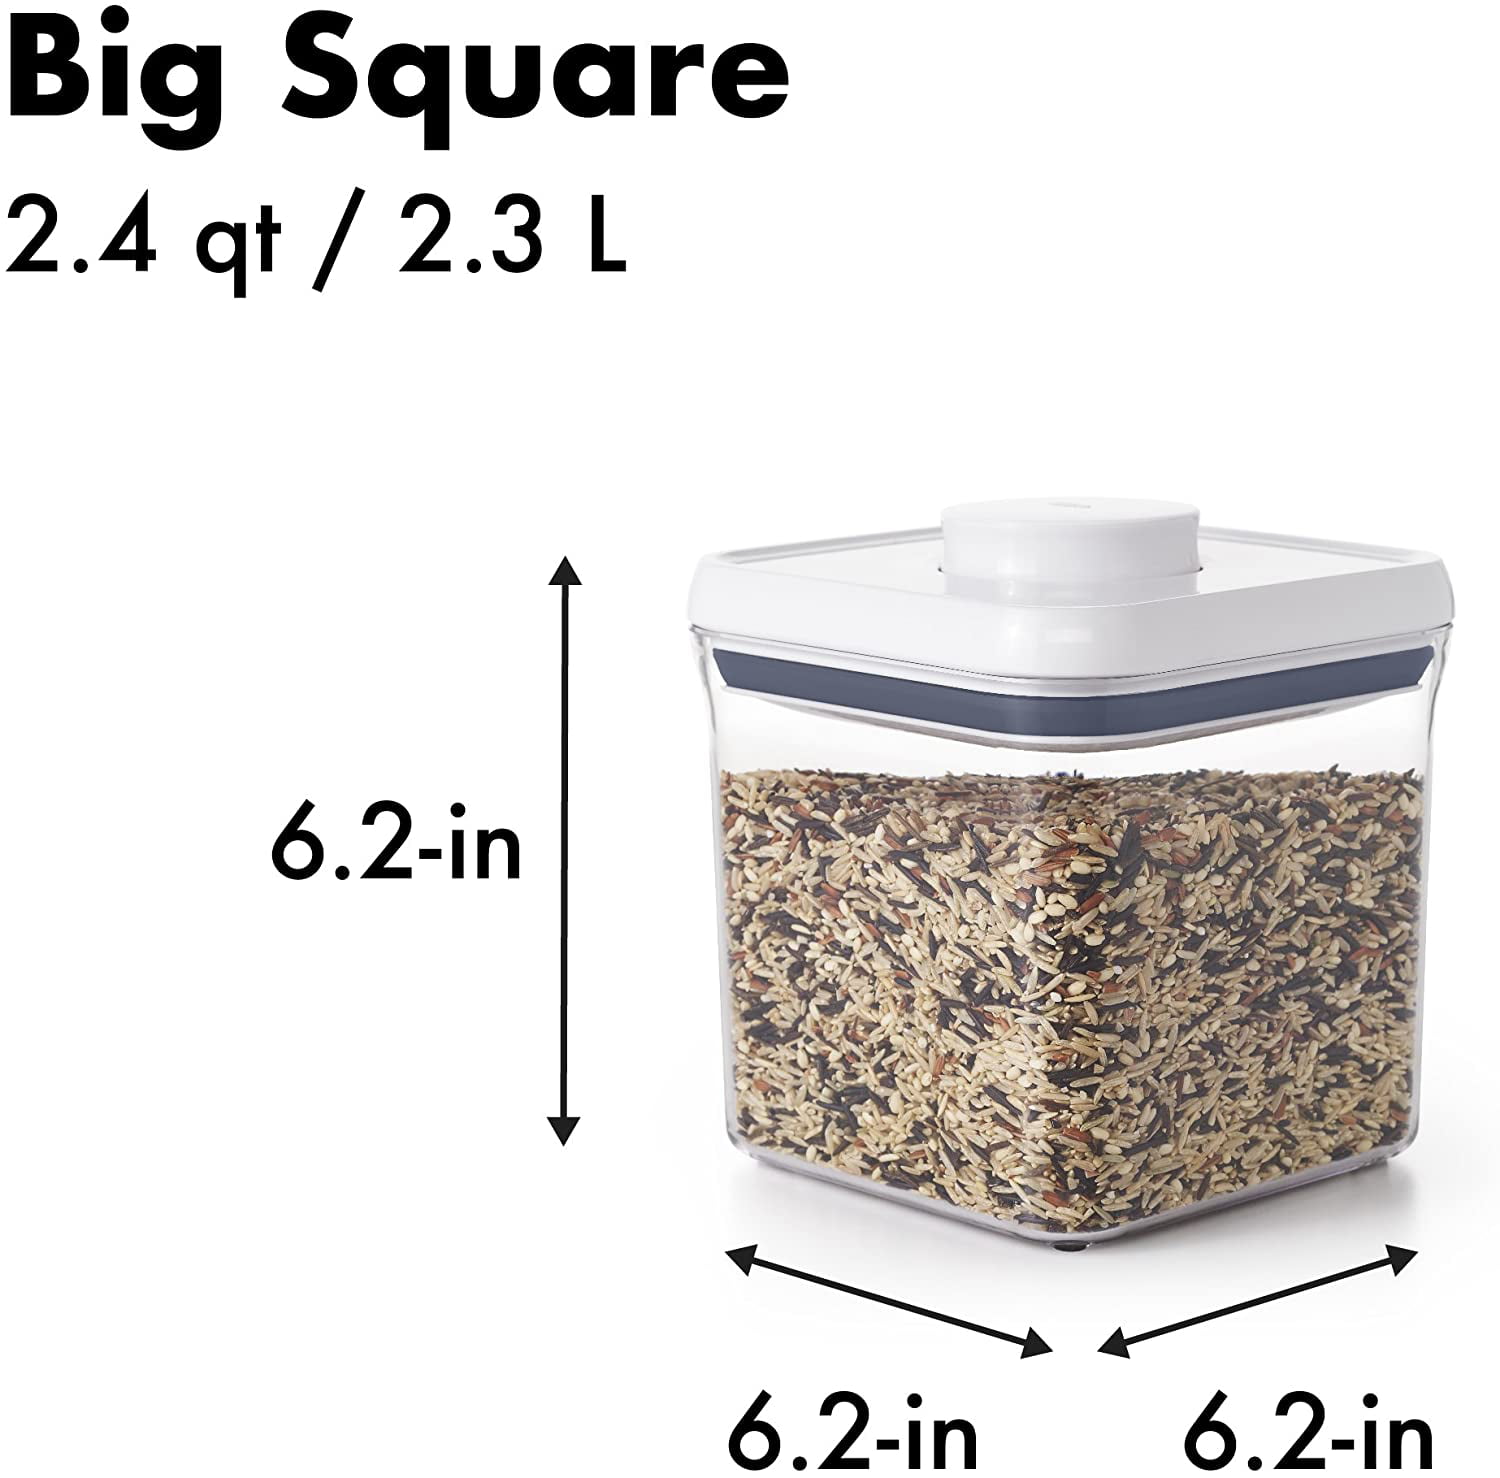  OXO Good Grips POP Container - Airtight Food Storage - Big  Square Medium 4.4 Qt Ideal for 5lbs of flour or sugar : Home & Kitchen